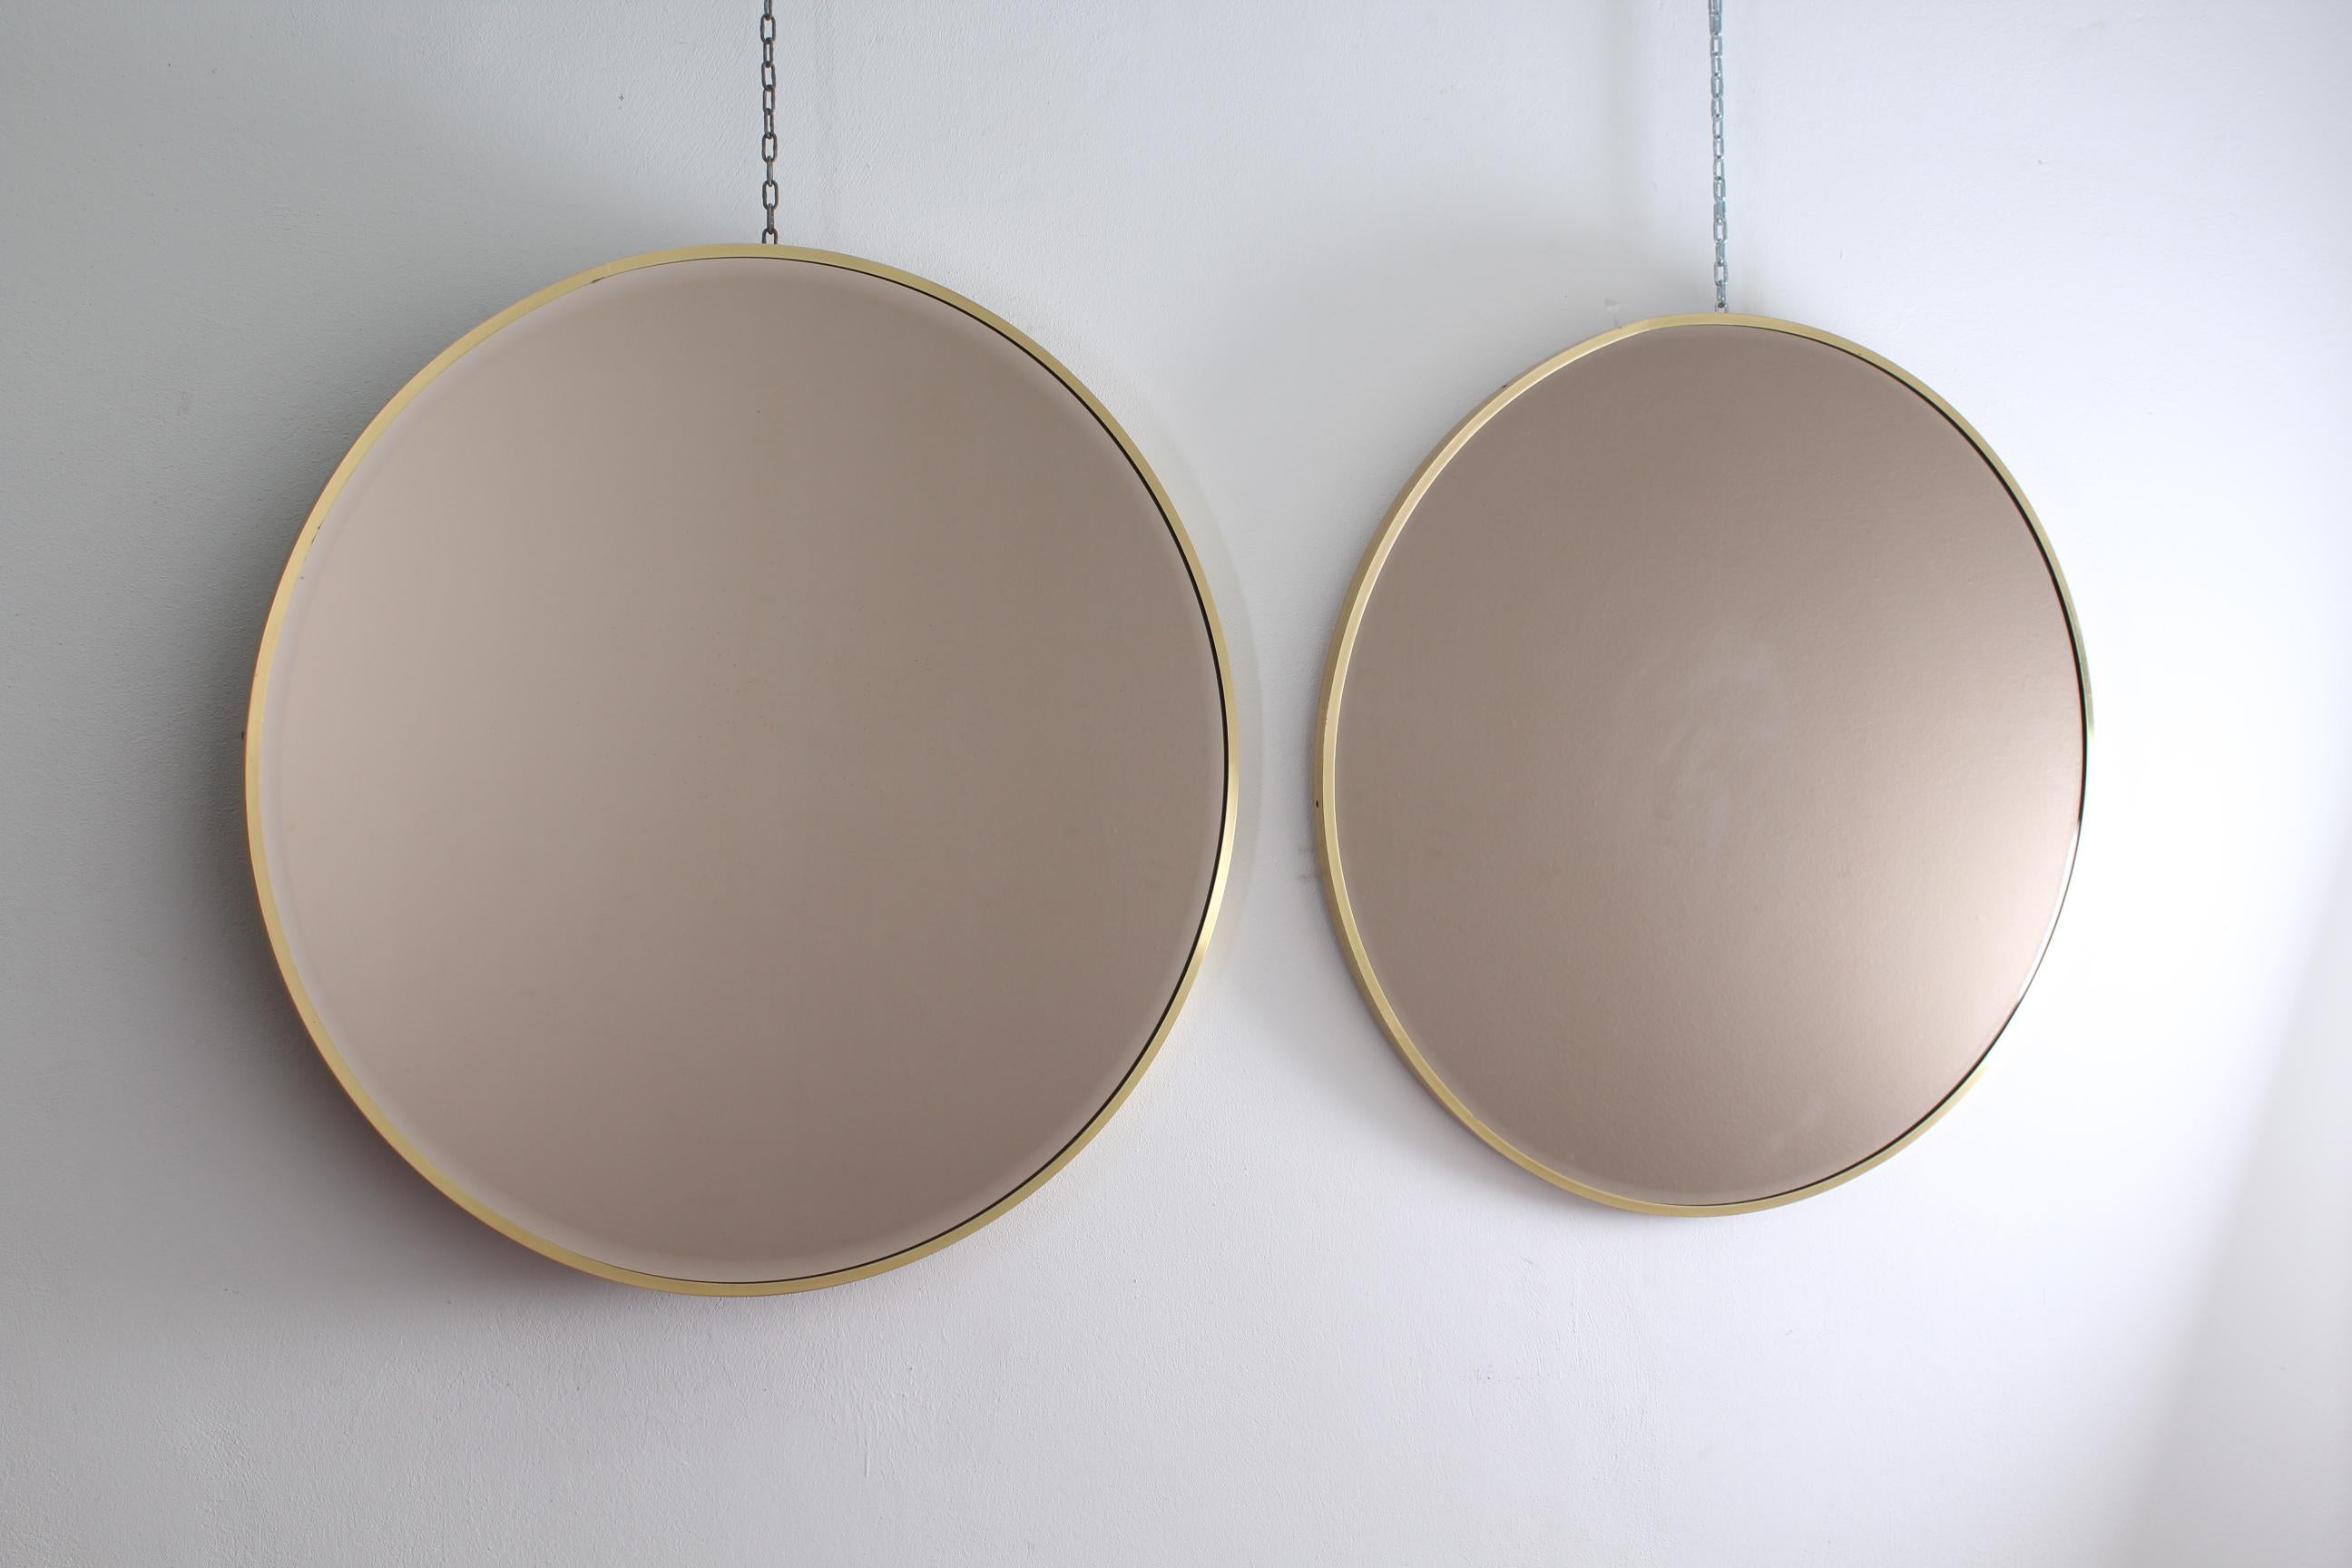 Stylish round brass and glass pair of mirrors, attribuited to Gio'  Ponti ,Italy 1960s.
Wear consistent with age and use.